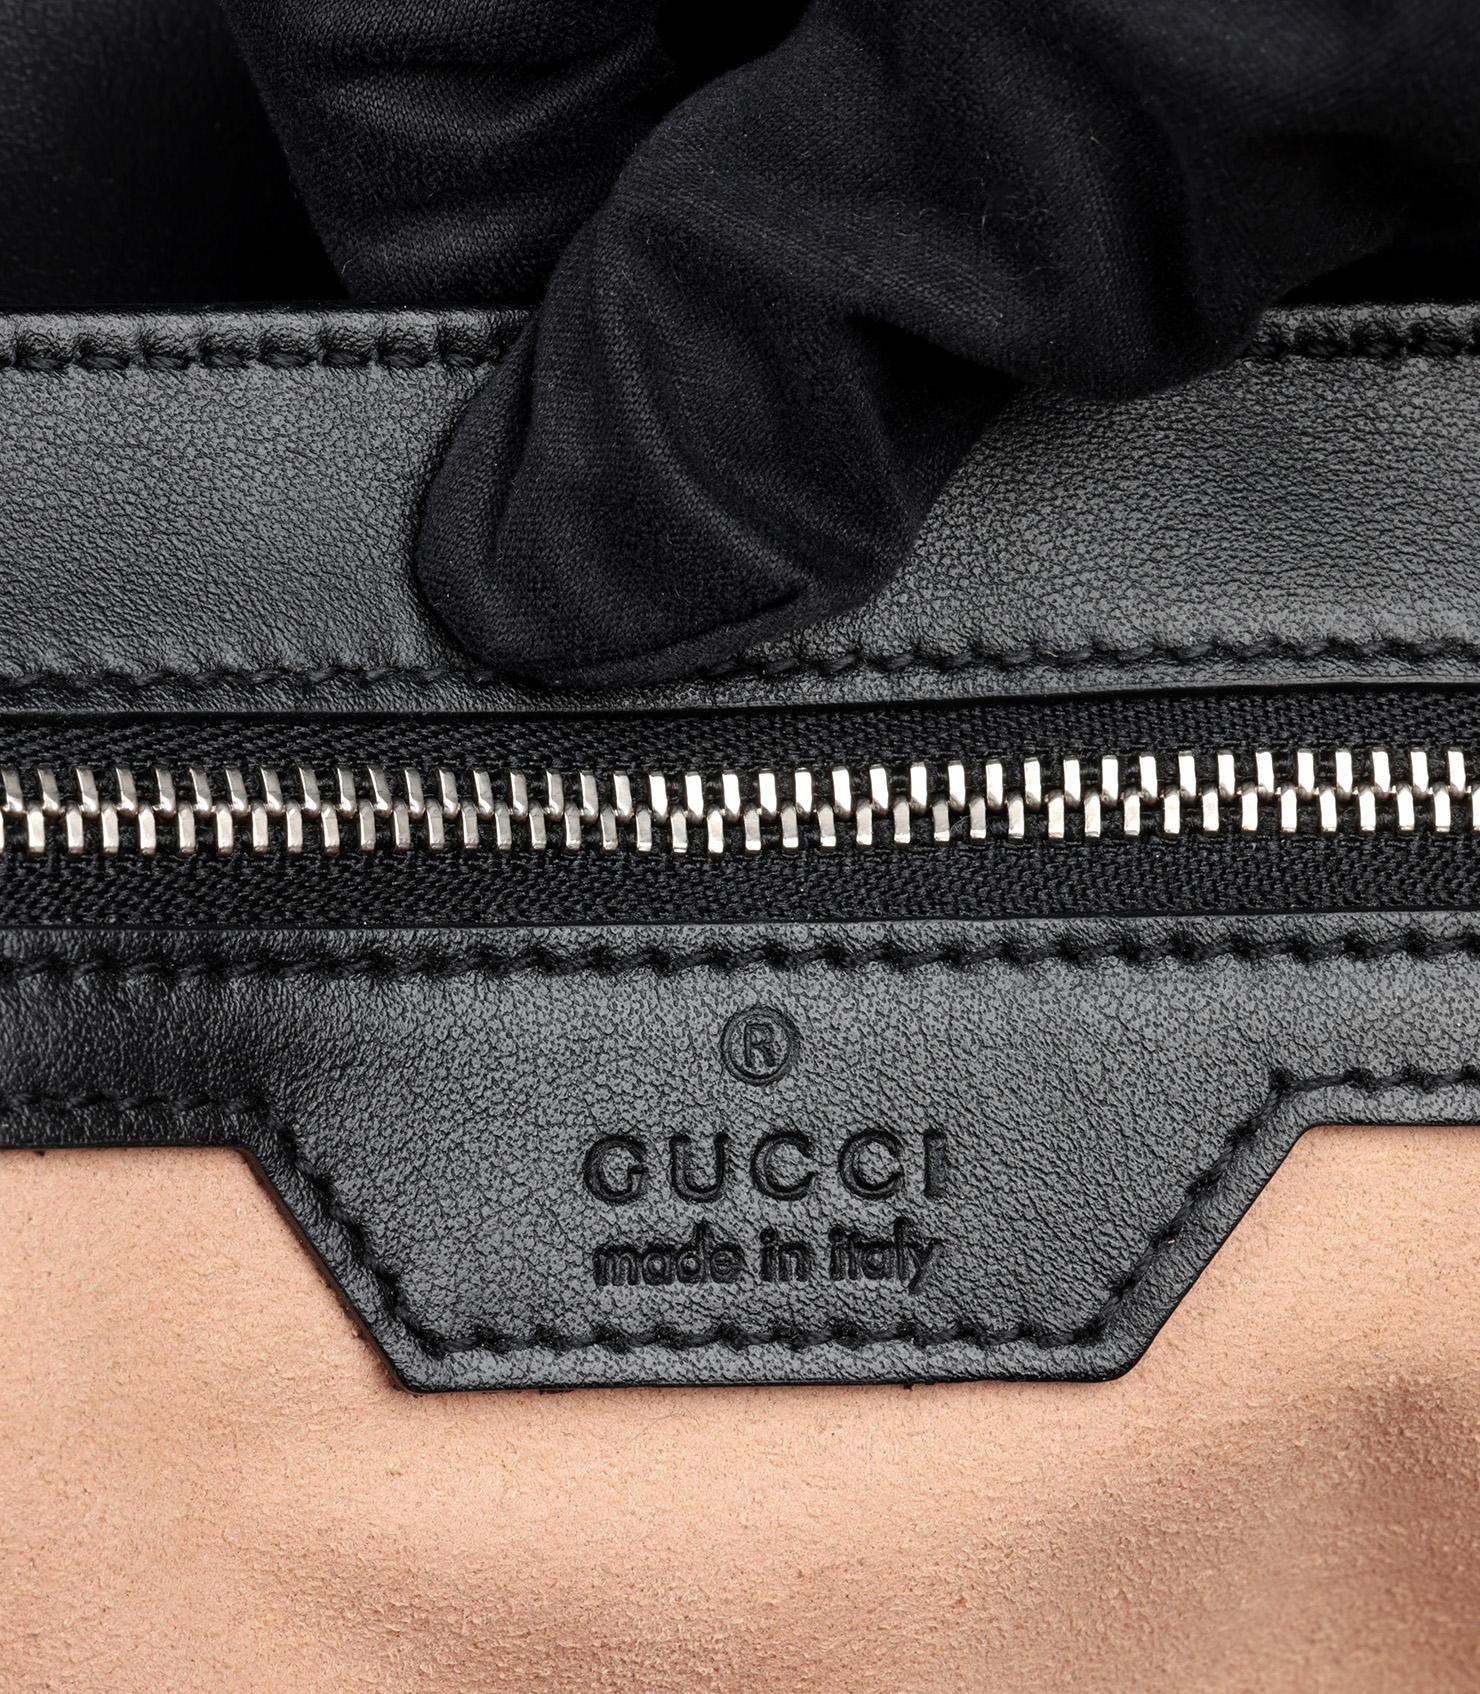 Gucci Black Quilted Calfskin Leather Medium GG Marmont For Sale 3